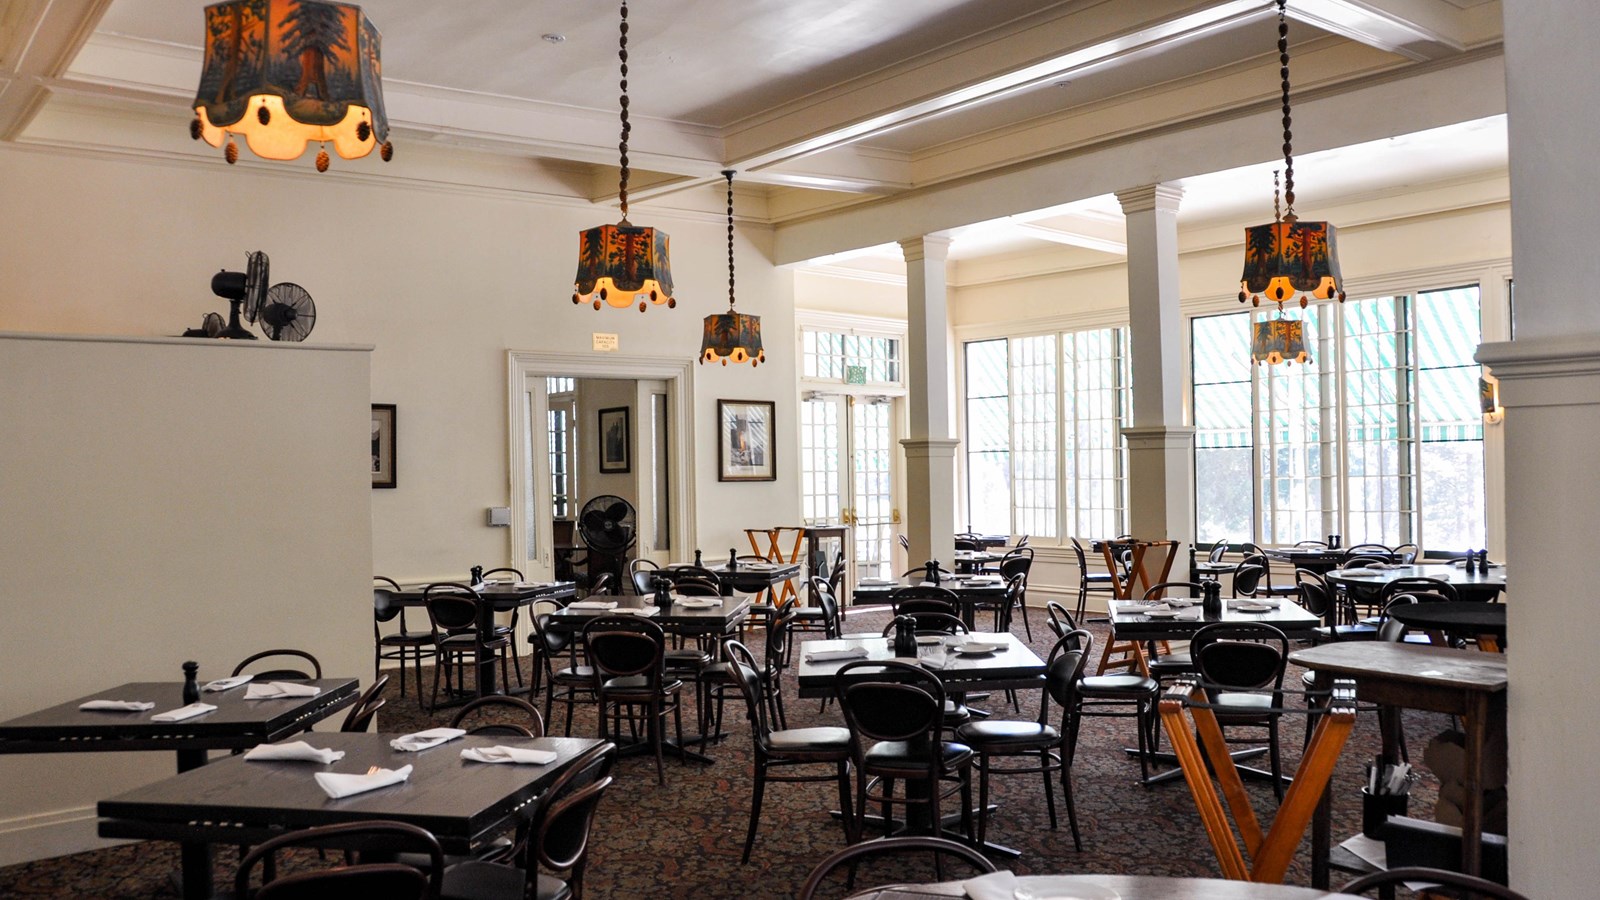 Indoor seating in the historic hotel dining room